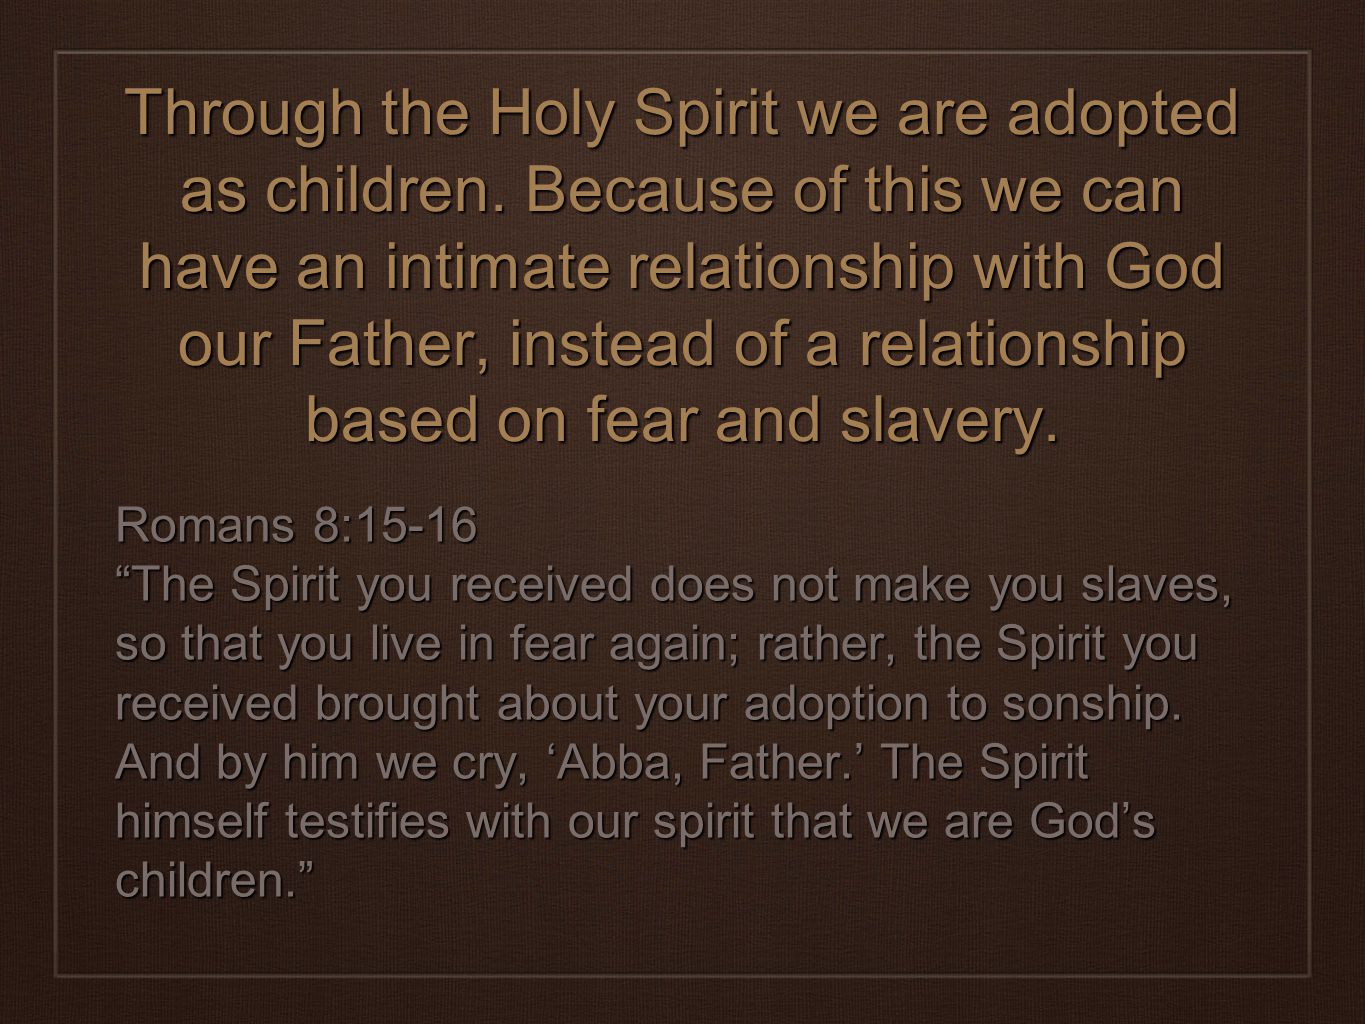 Through the Holy Spirit we are adopted as children.